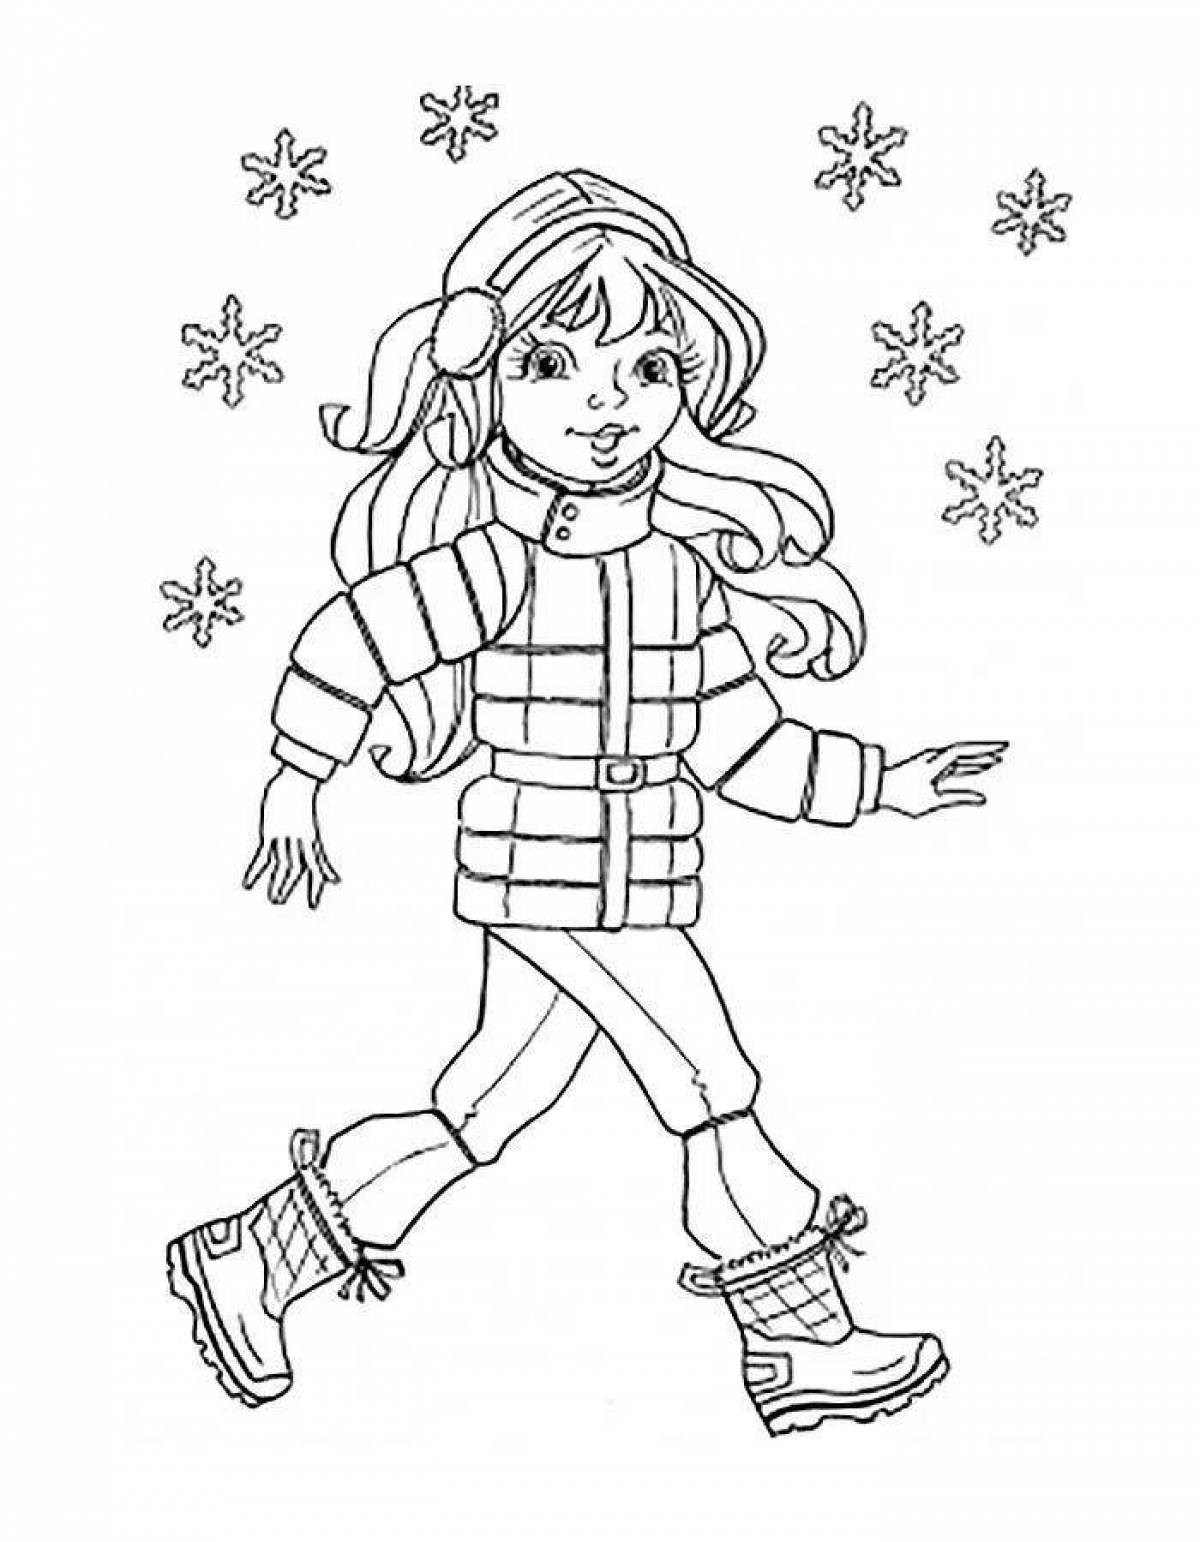 Bright winter coloring for girls